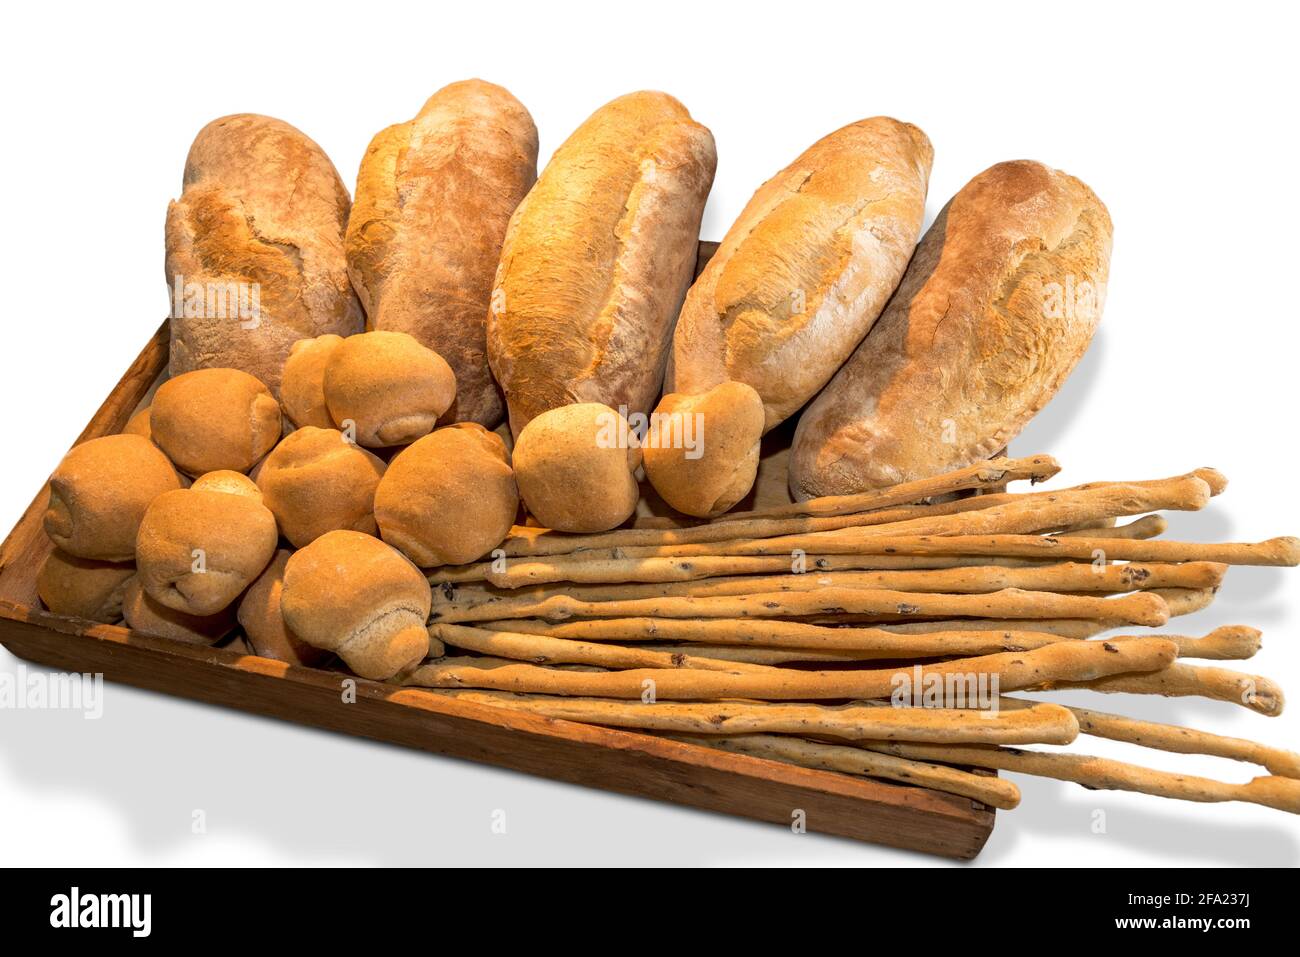 Italian bread, large rustic loaves and fresh baked buns with olive breadsticks in wooden tray, isolated on white Stock Photo